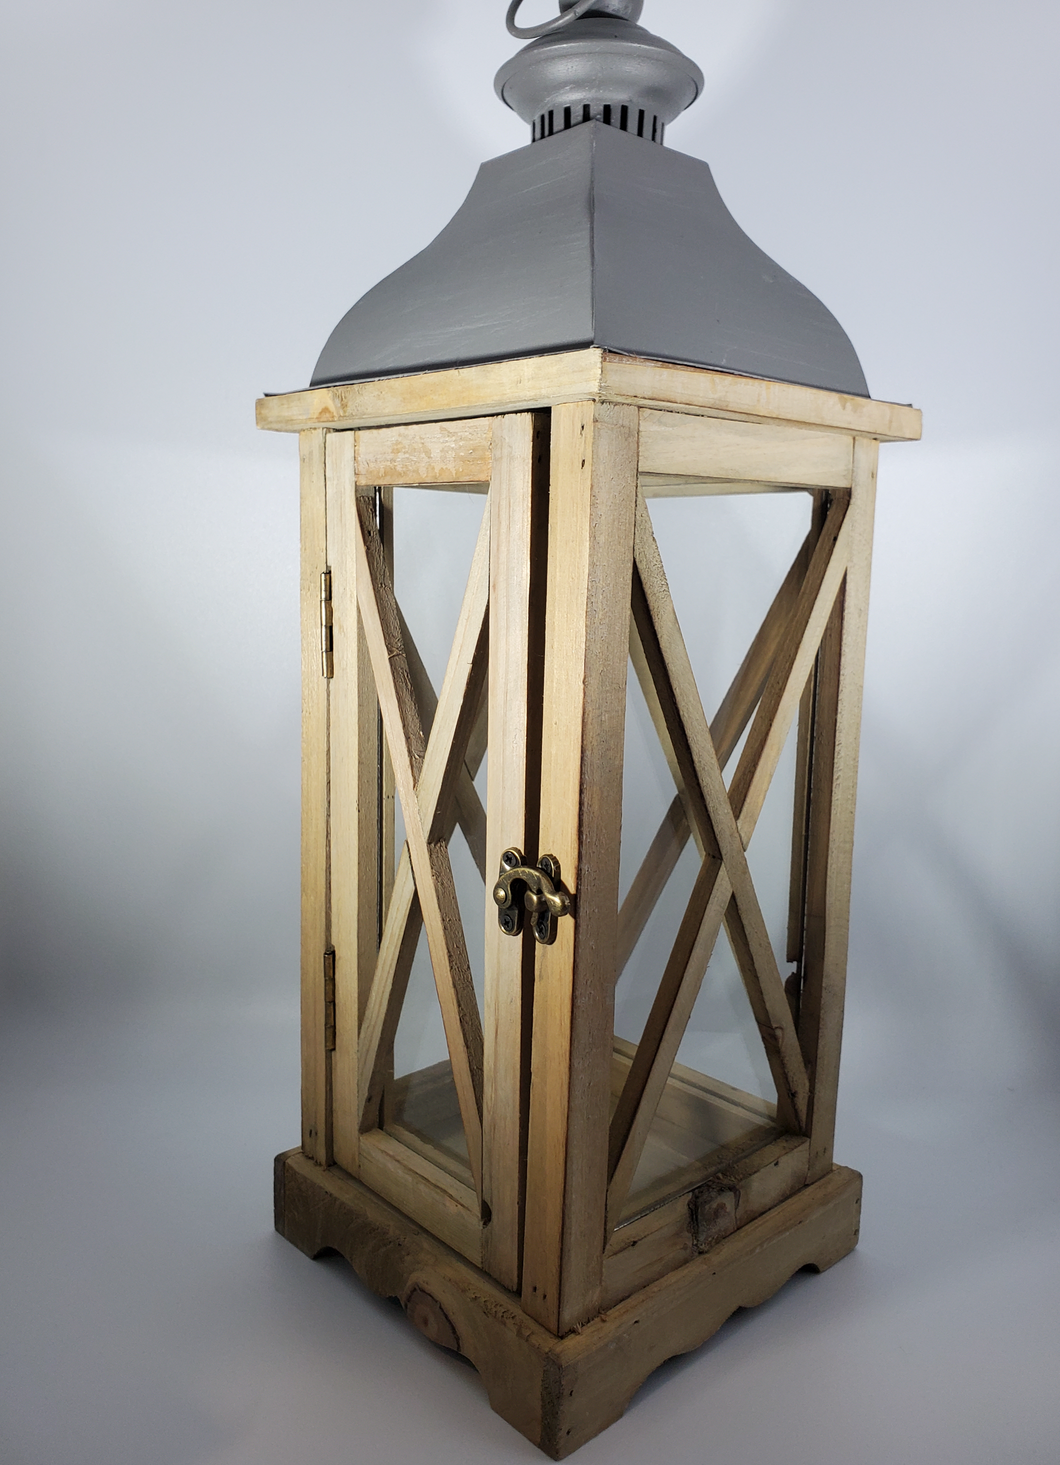 6 x 6 x 20 Inch Wood Decorative Candle Lantern Vintage Rustic Large Hanging Candle Holder with Real Glass for Indoor Outdoor Use